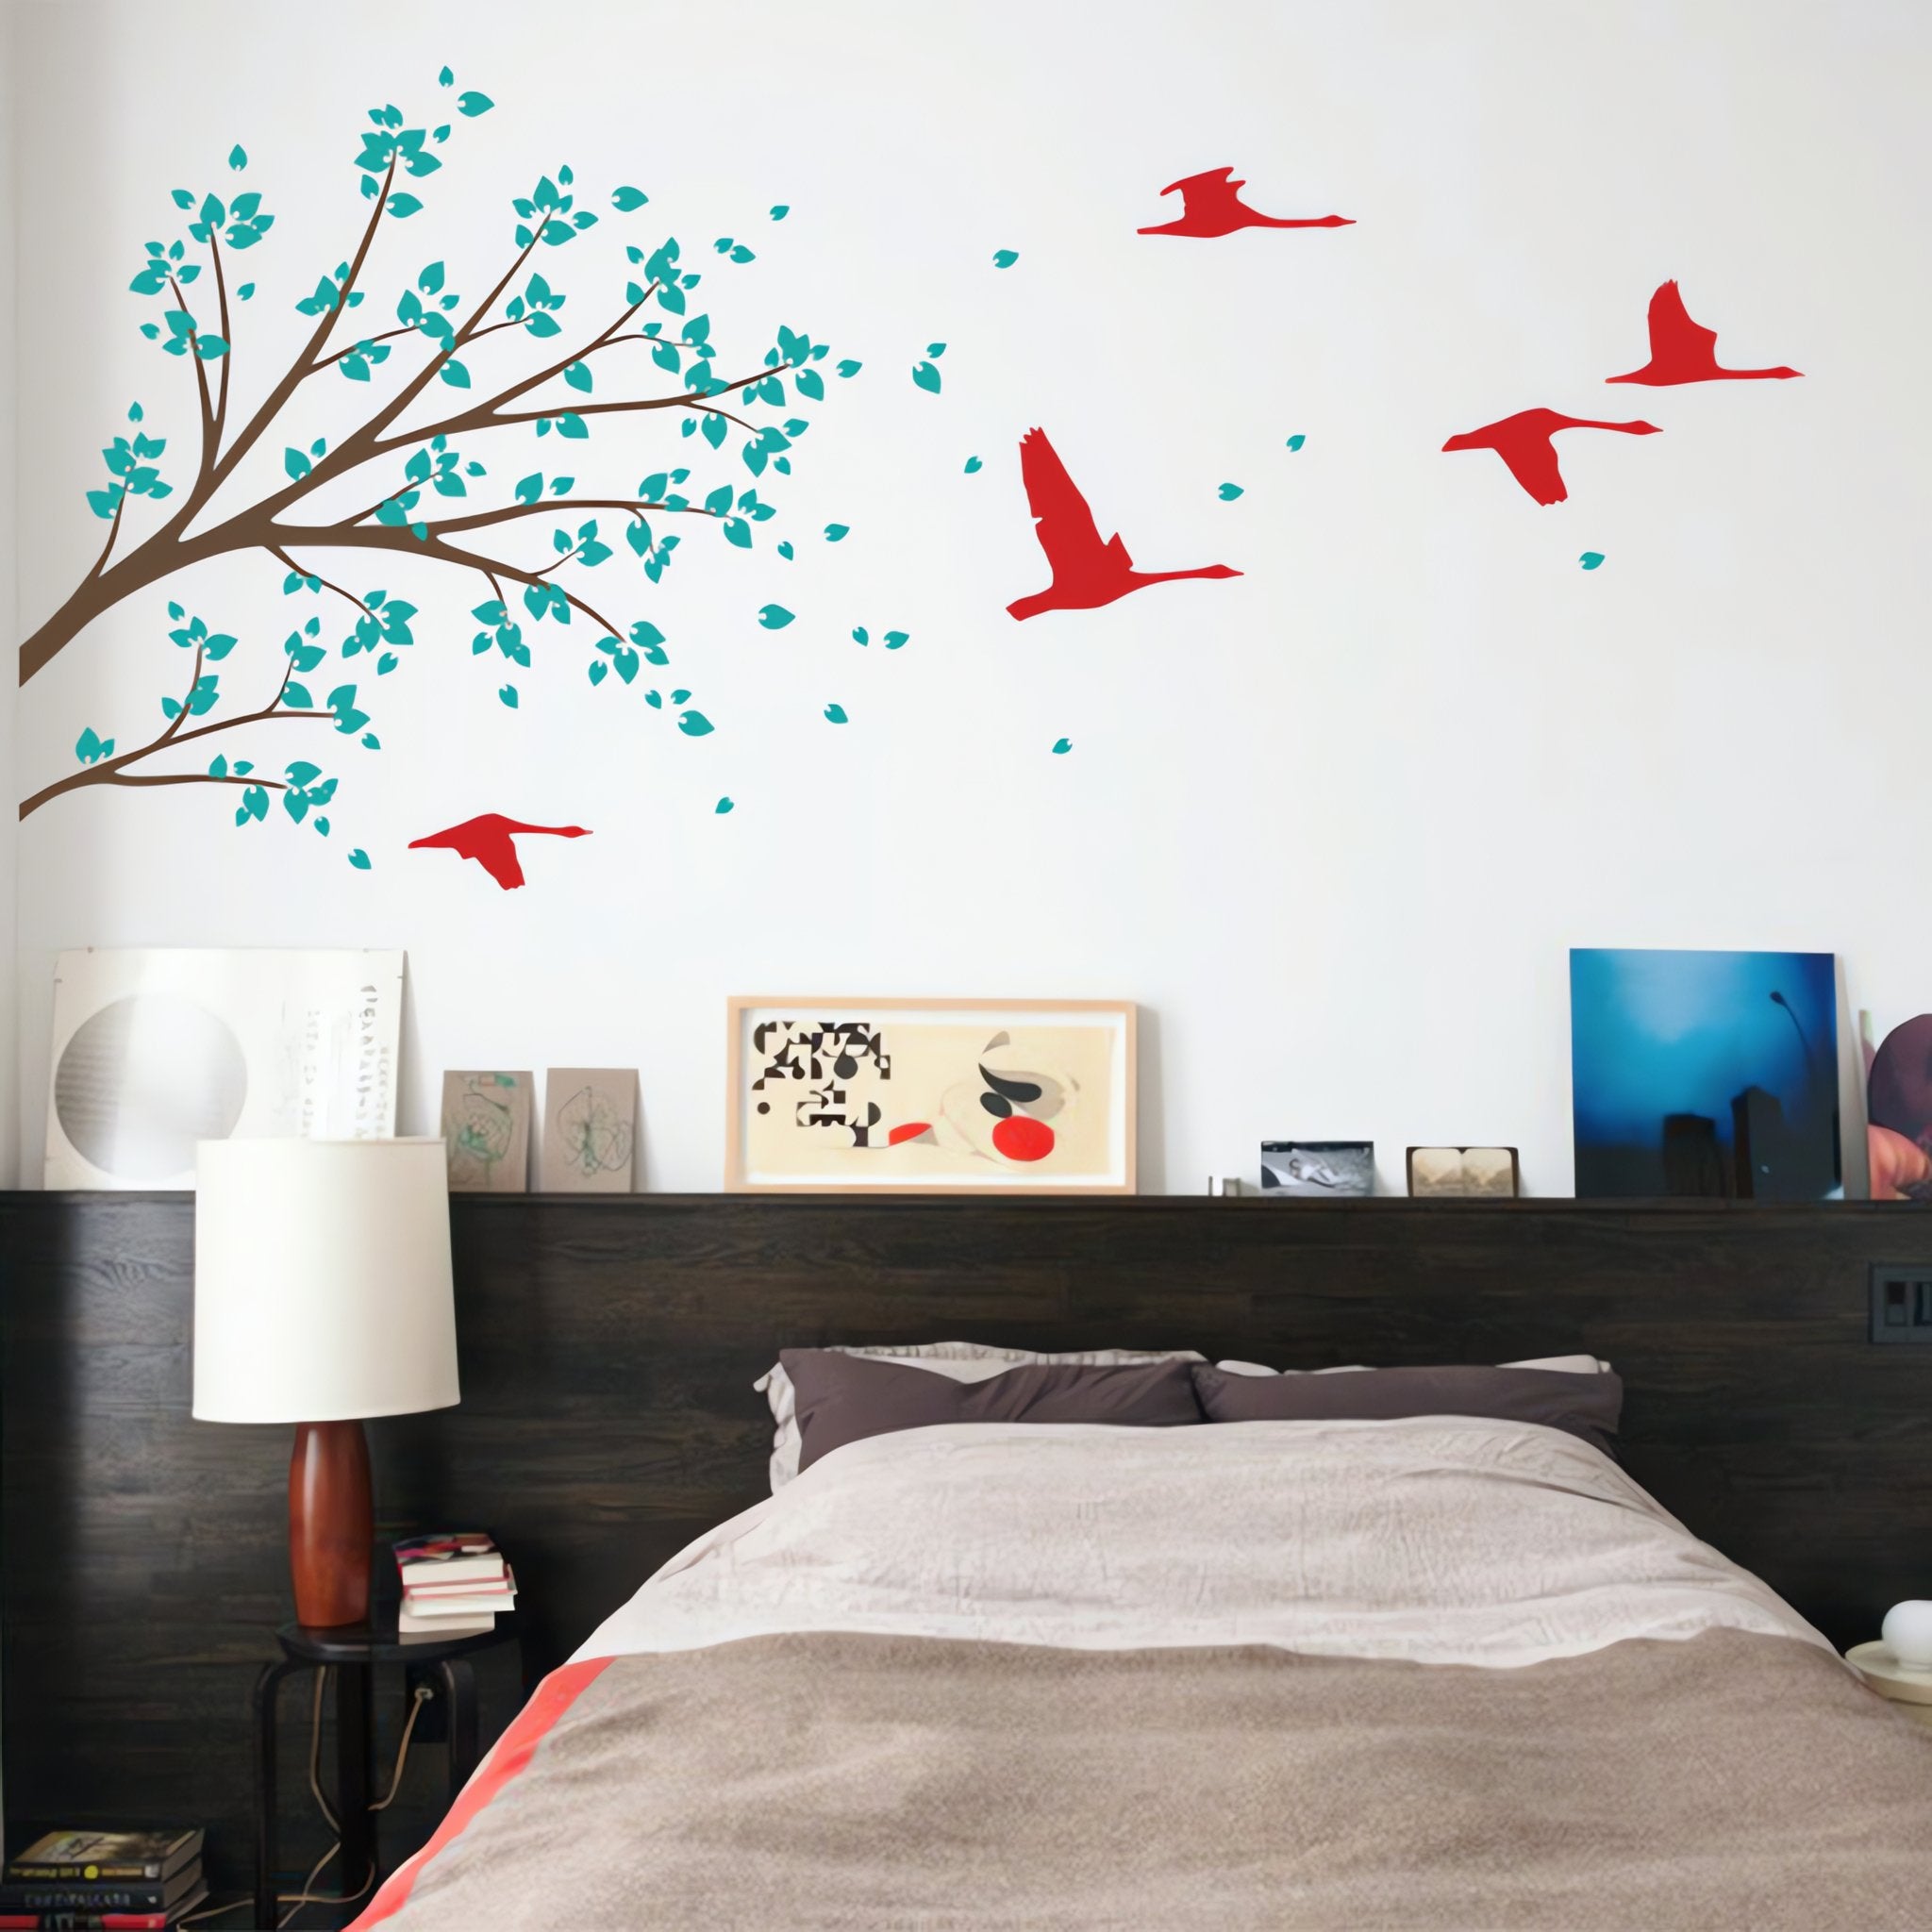 Tree wall sticker with overhanging branch and birds in an adult bedroom.